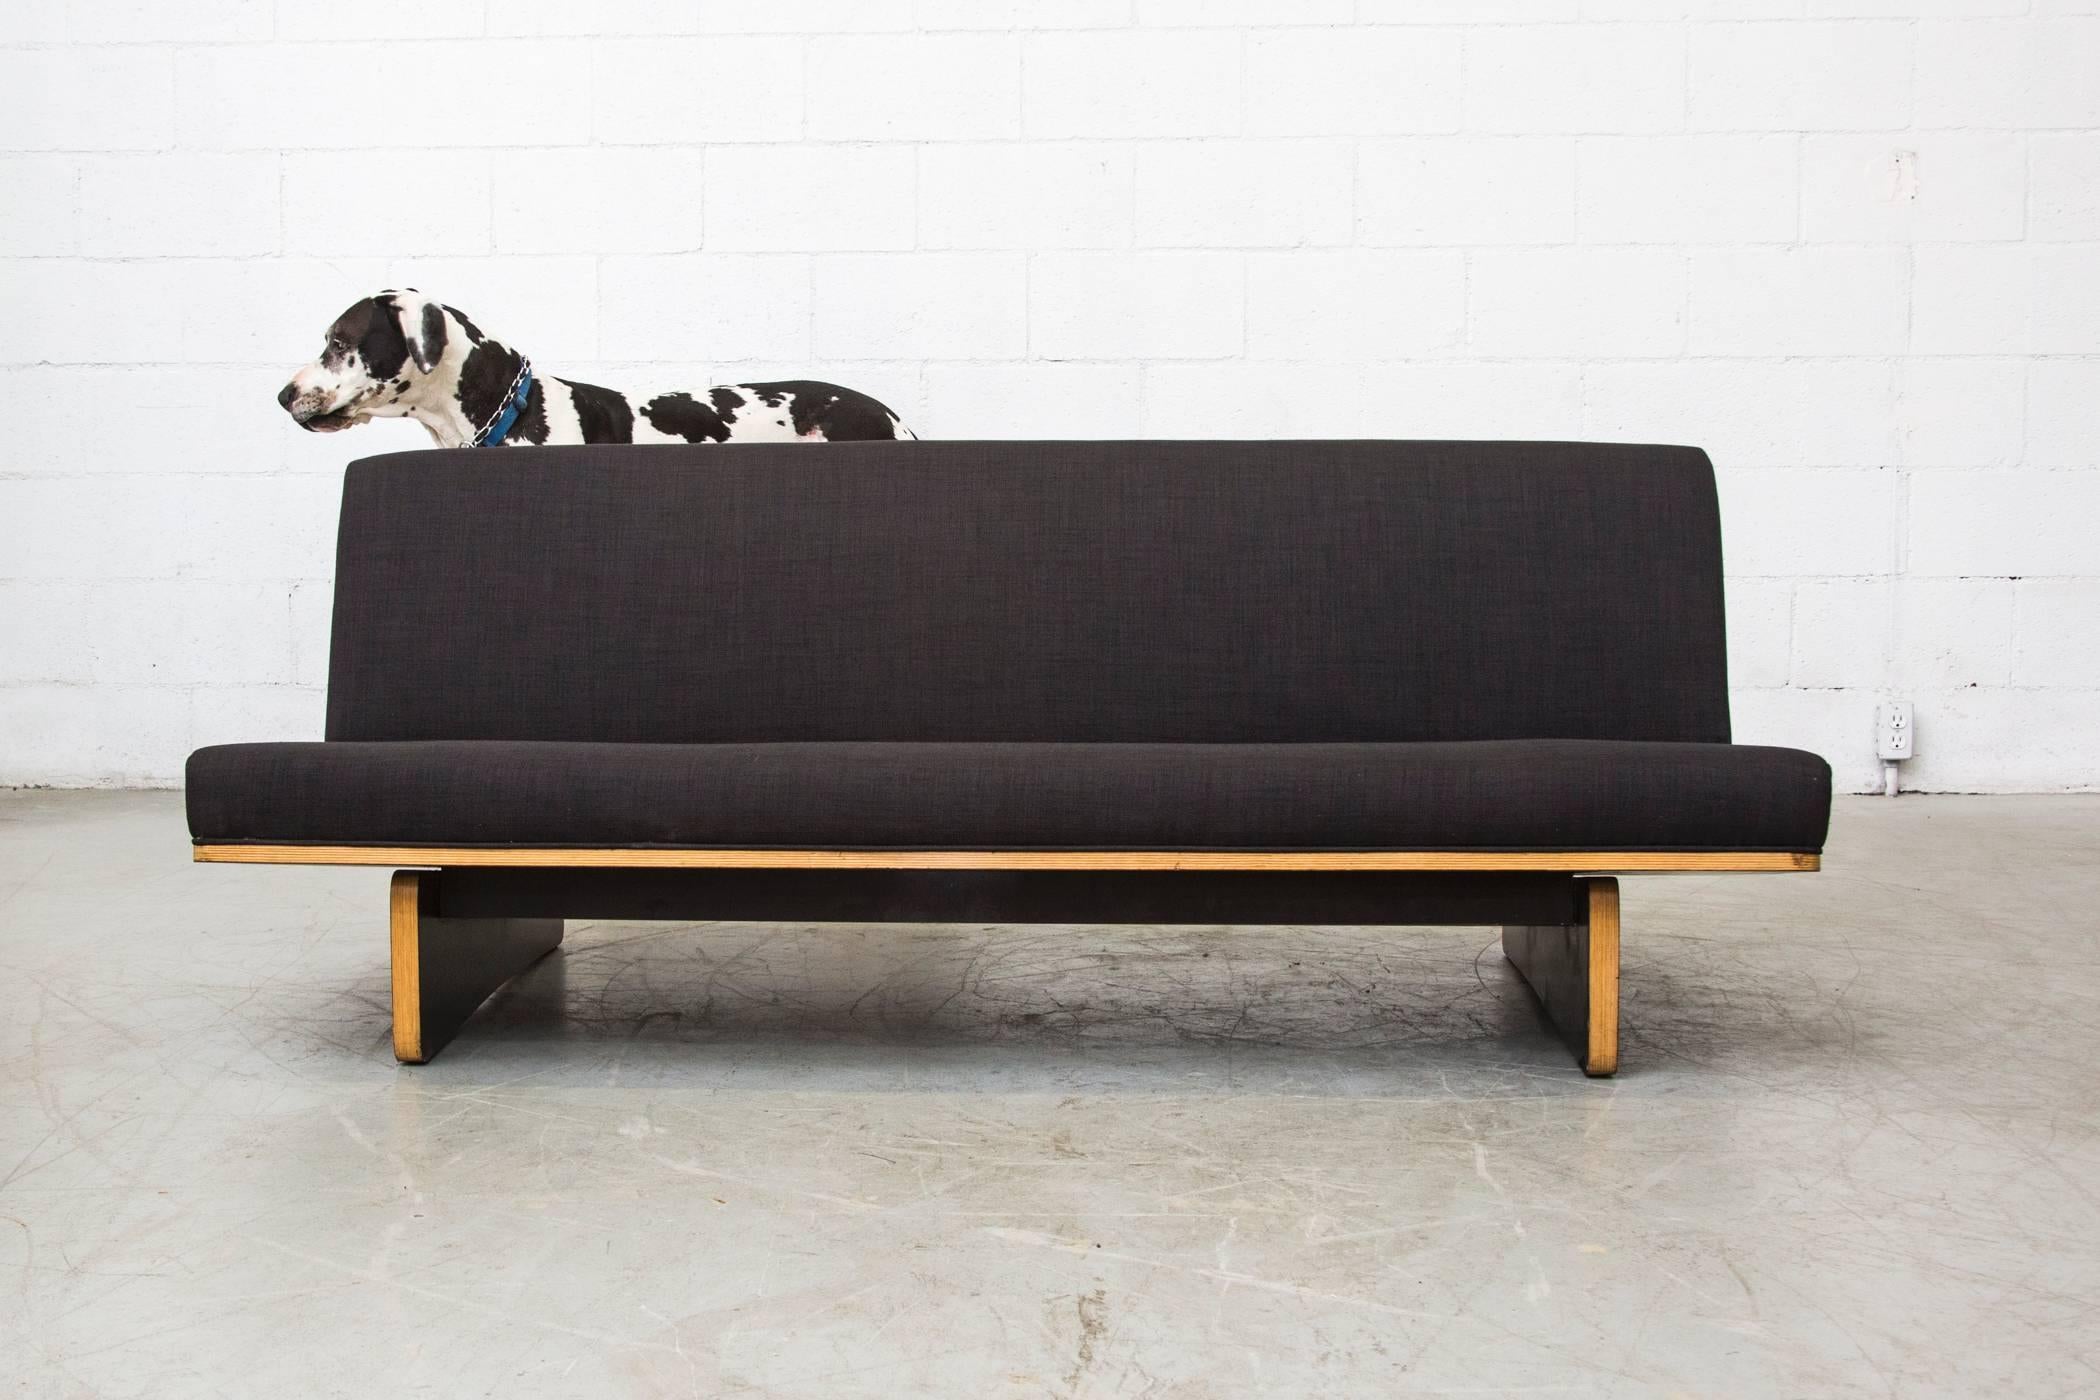 Newly reupholstered rare three-seat Kho Liang le sofa in almost black fabric with black lacquered laminated plywood base. Base is original and shows light scratching to black laminate and wood consistent with age and use.